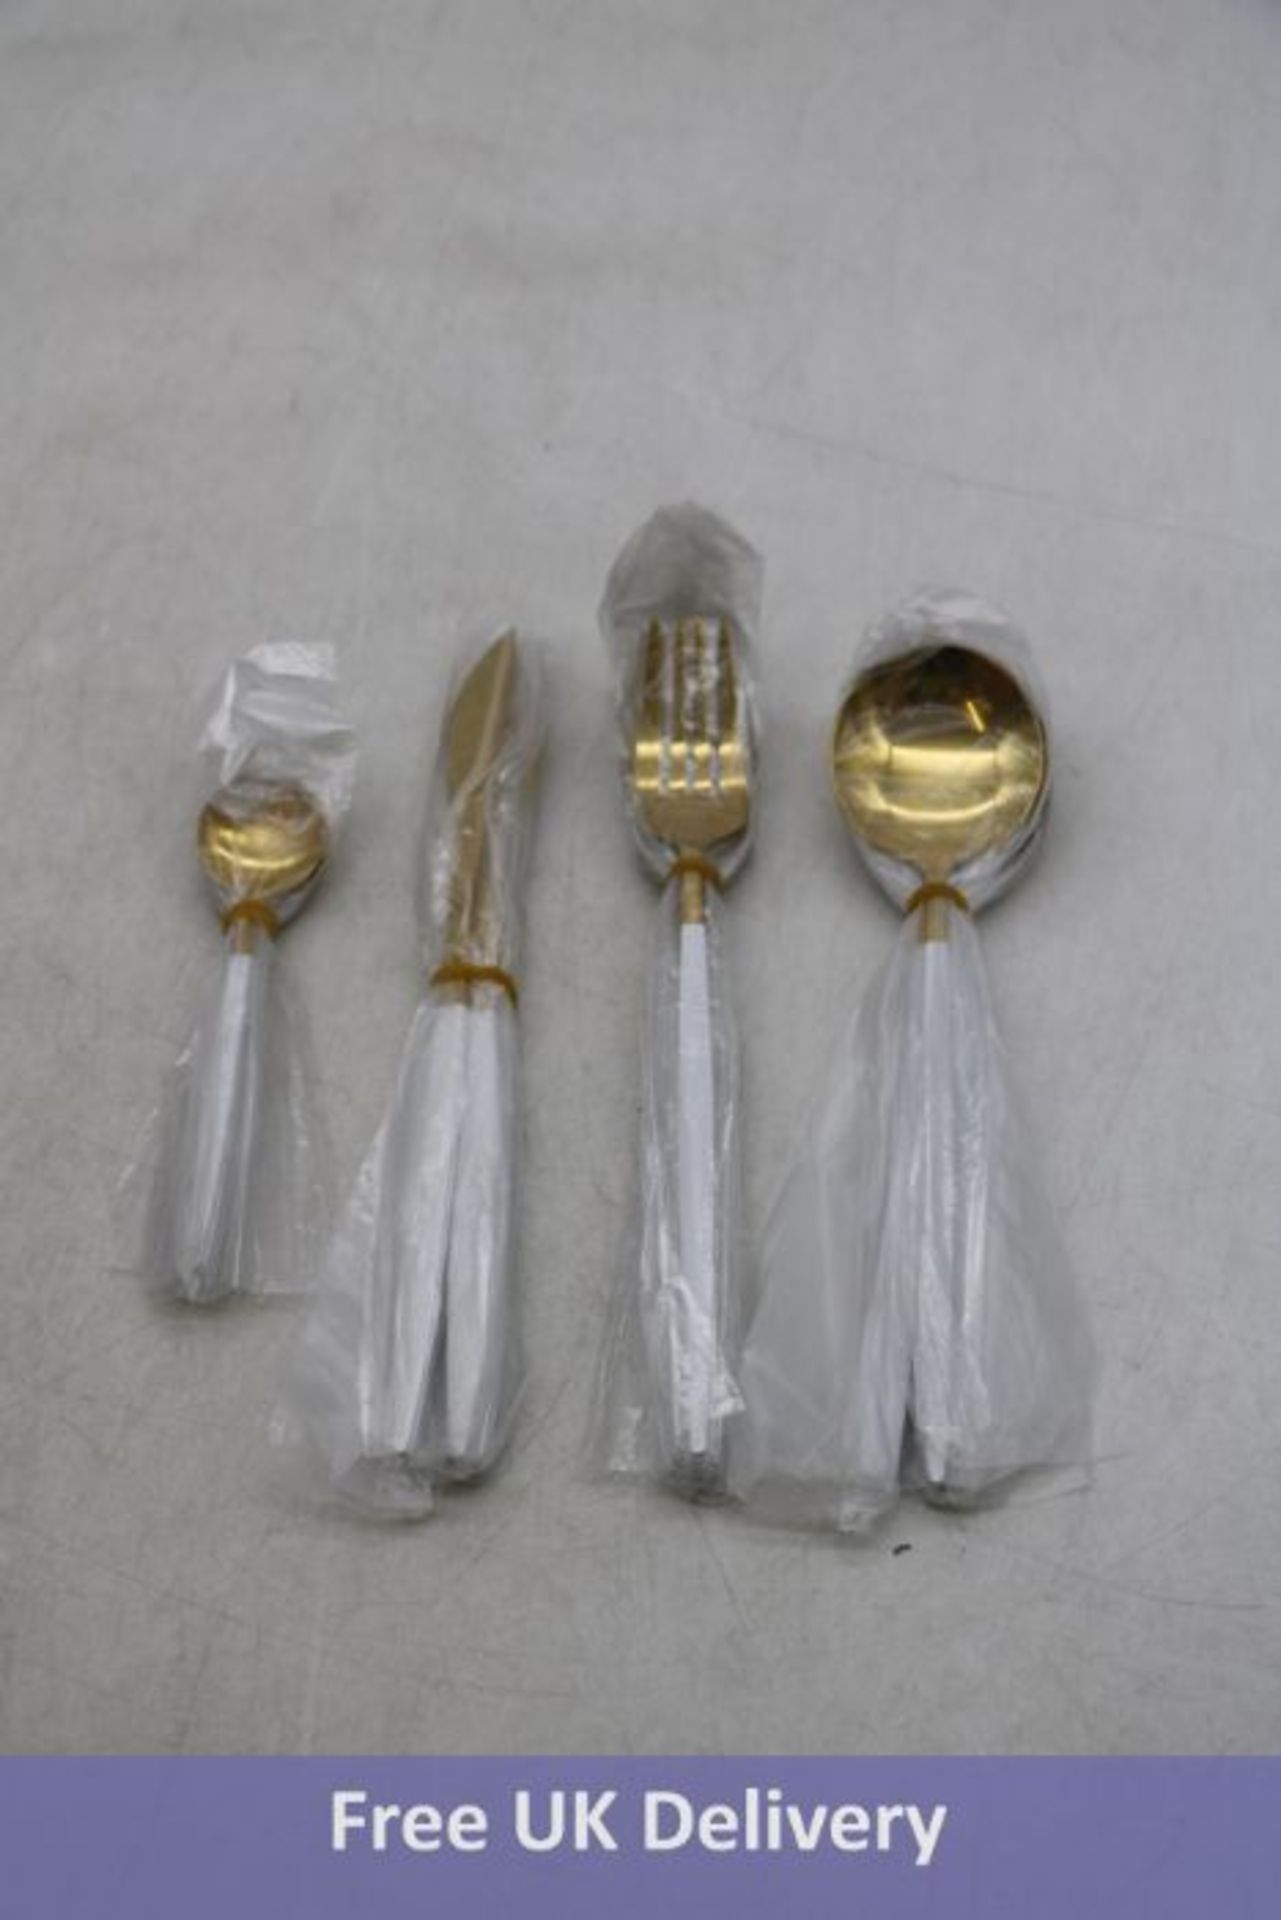 Two Elegant Tableware Series, 24-Piece Gold Cutlery Sets, Stainless Steel. OVER 18's ONLY - Image 2 of 2